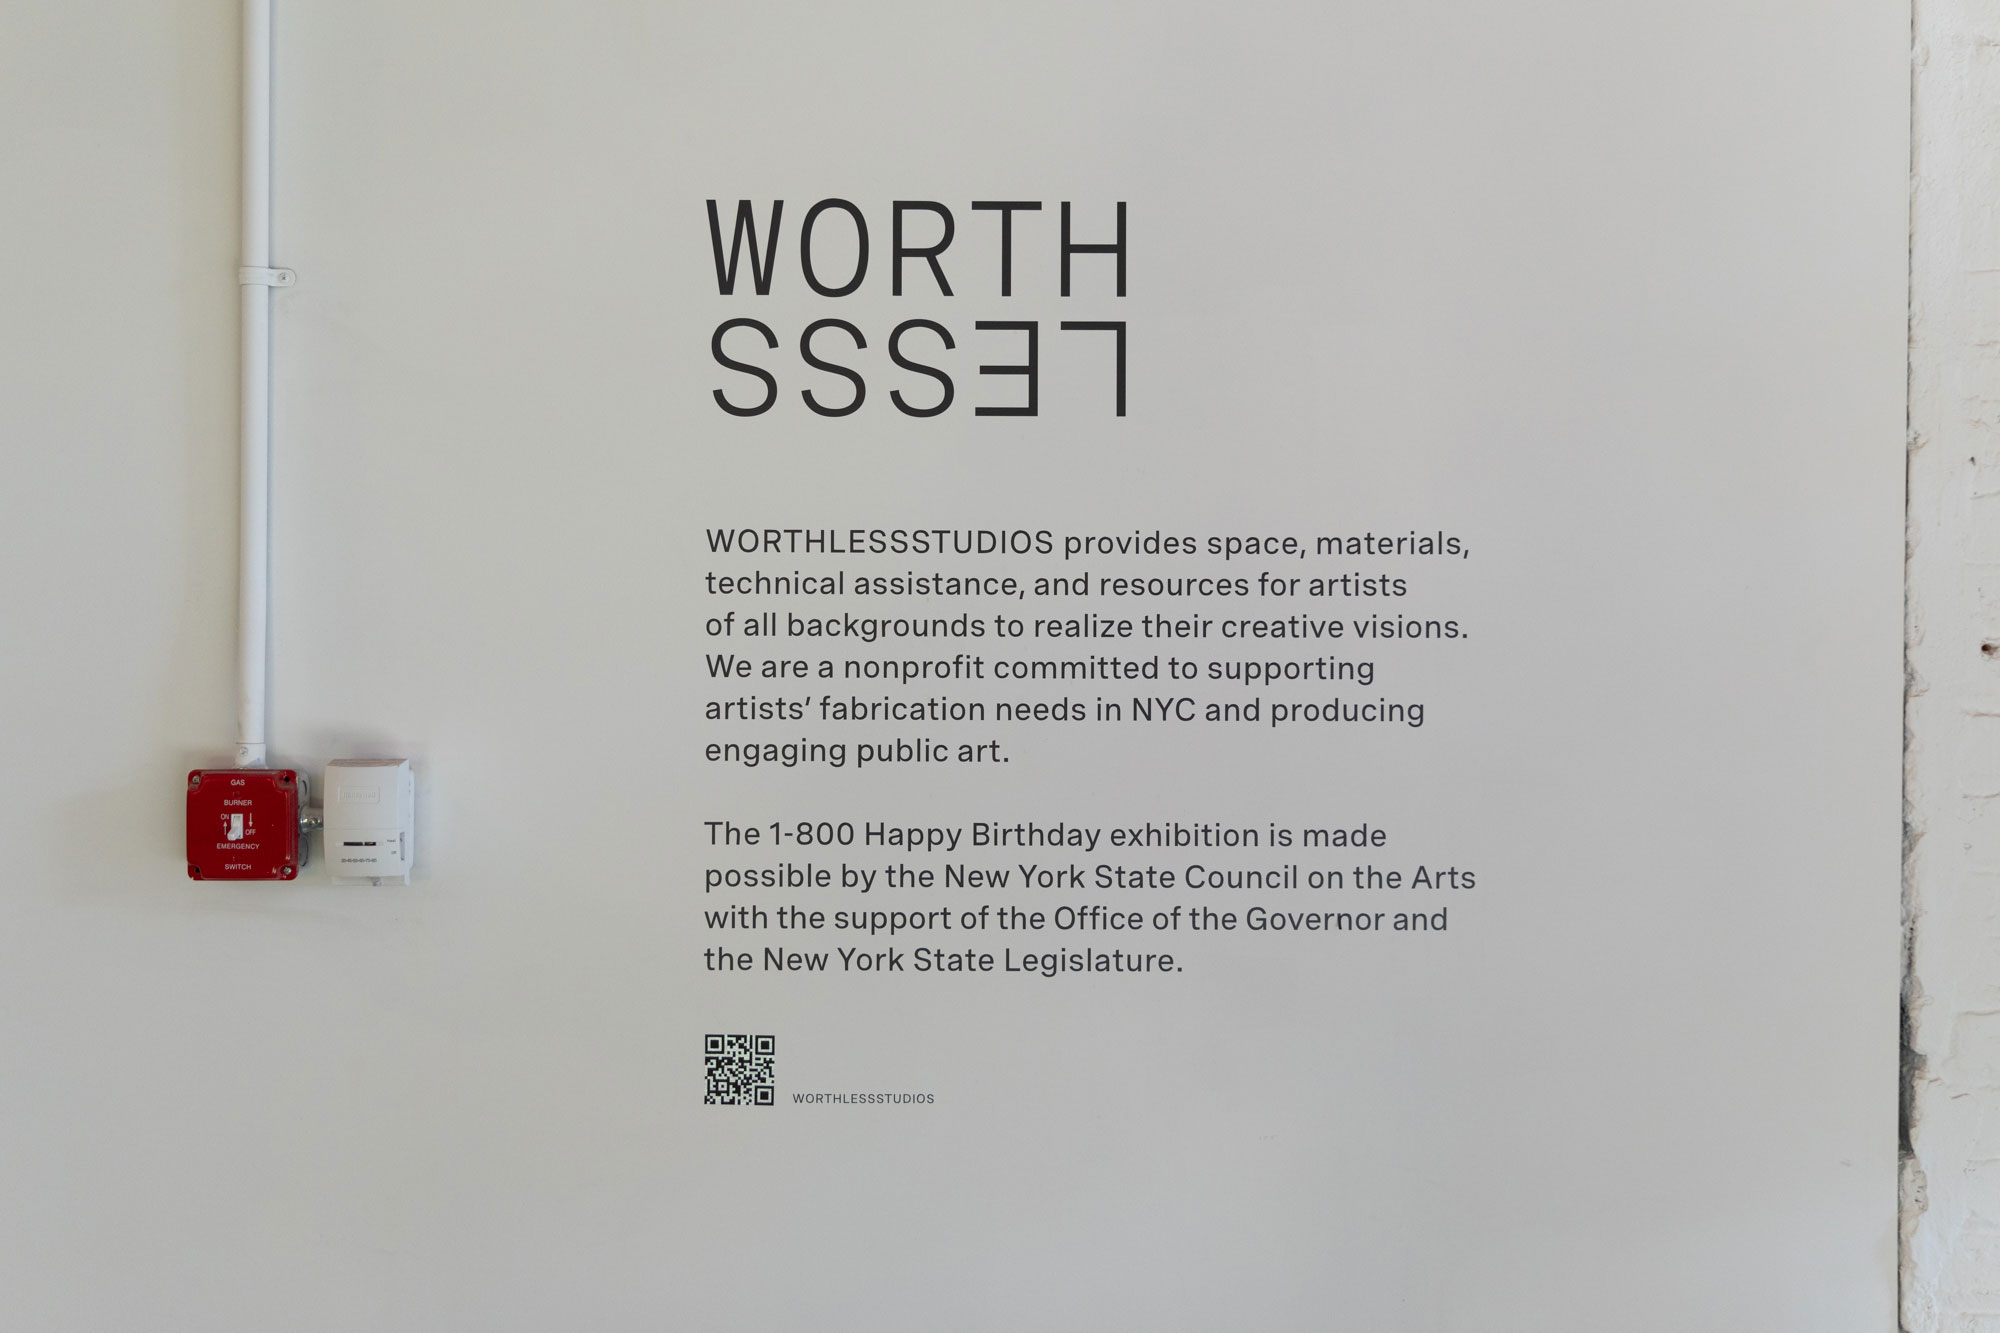 An image of left-aligned black text printed on a white wall. The top text reads "WORTHLESSS" in all capital letter and is larger than the two paragraphs below. It is positioned so that the word WORTH is on top of the second half of the word, LESSS, whose letters are inverted and flipped upside down. A small QR code is positioned underneath the second paragraph. A small, bright red gas burner emergency switch hangs on the wall to the left of the text. 